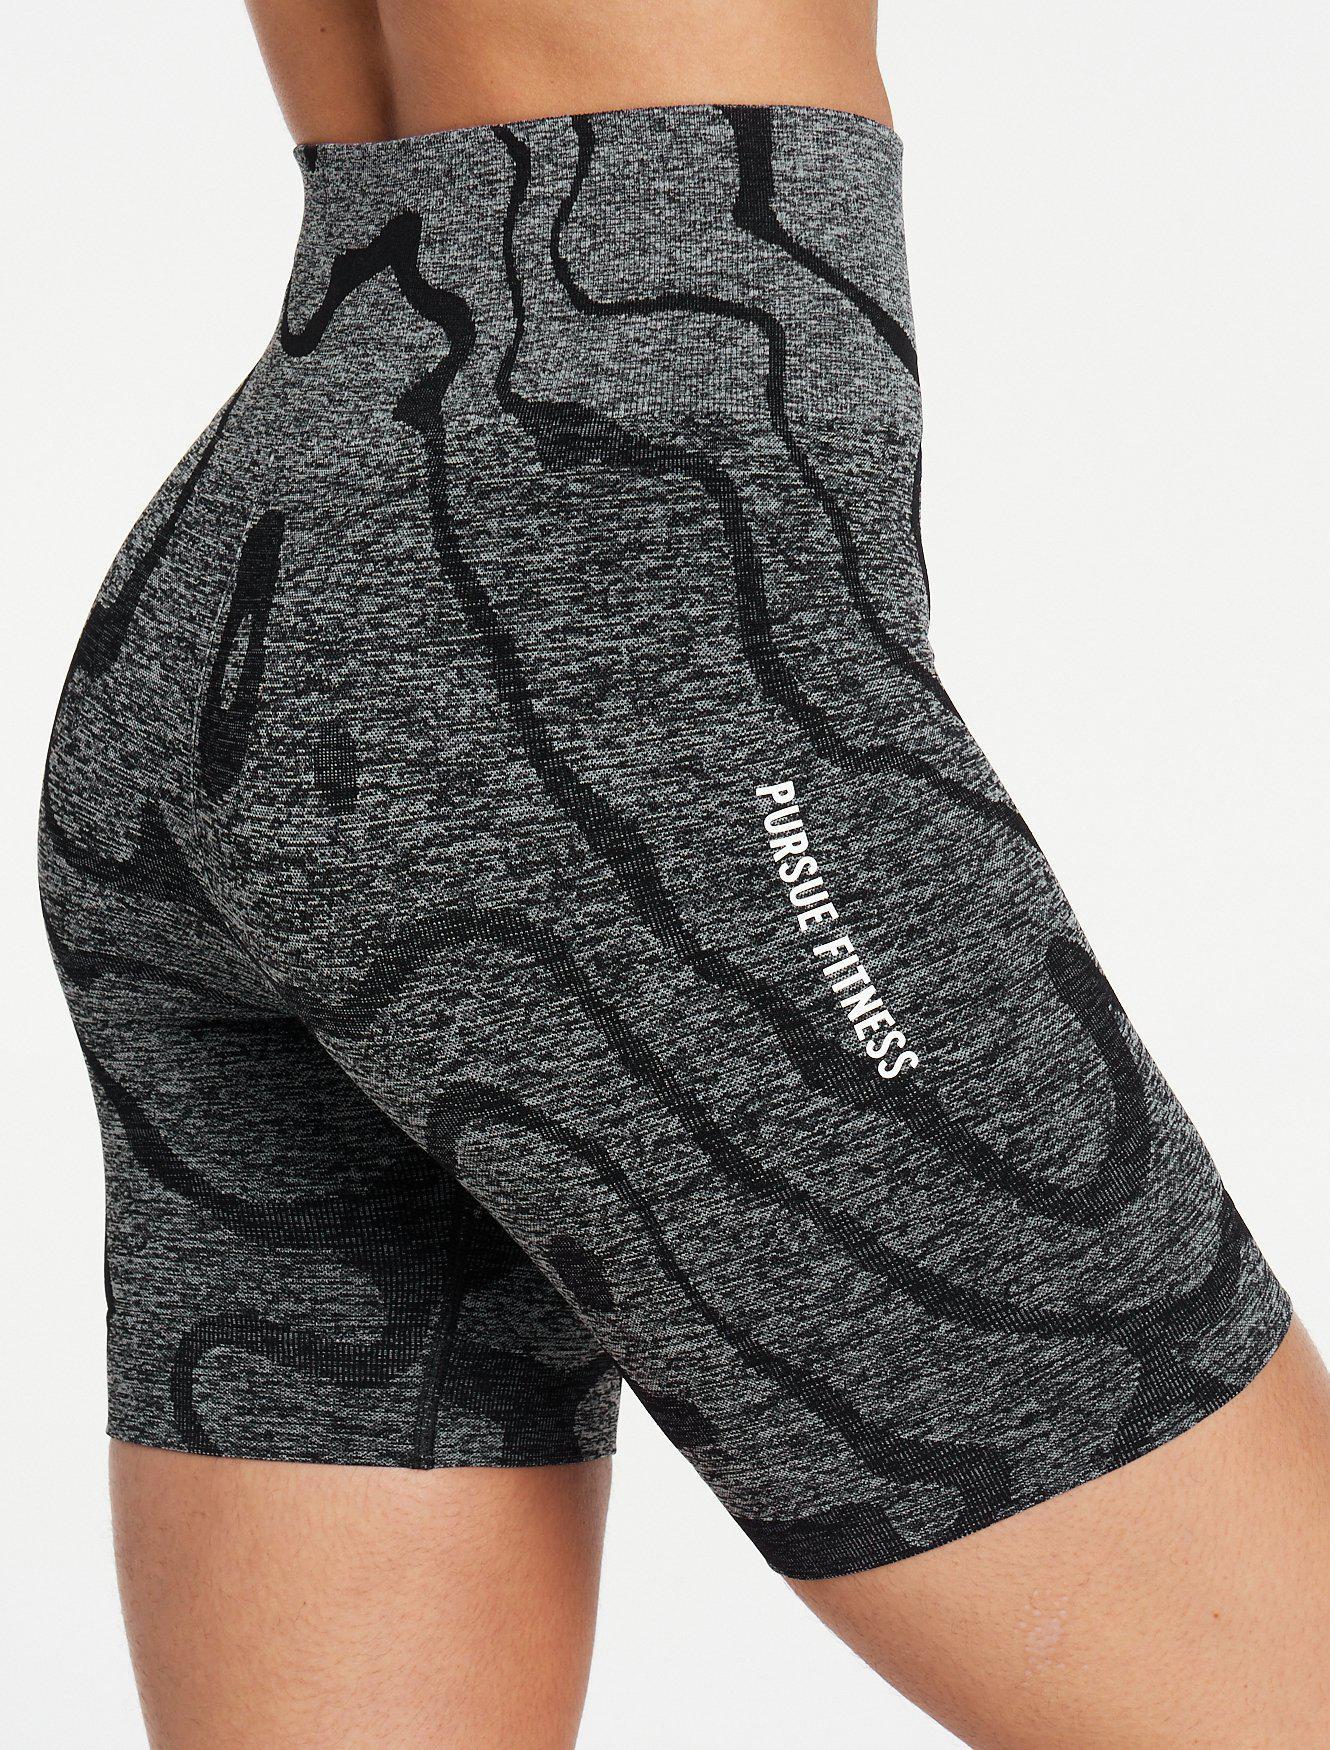 Sustainable Seamless Shorts / Black Pursue Fitness 5